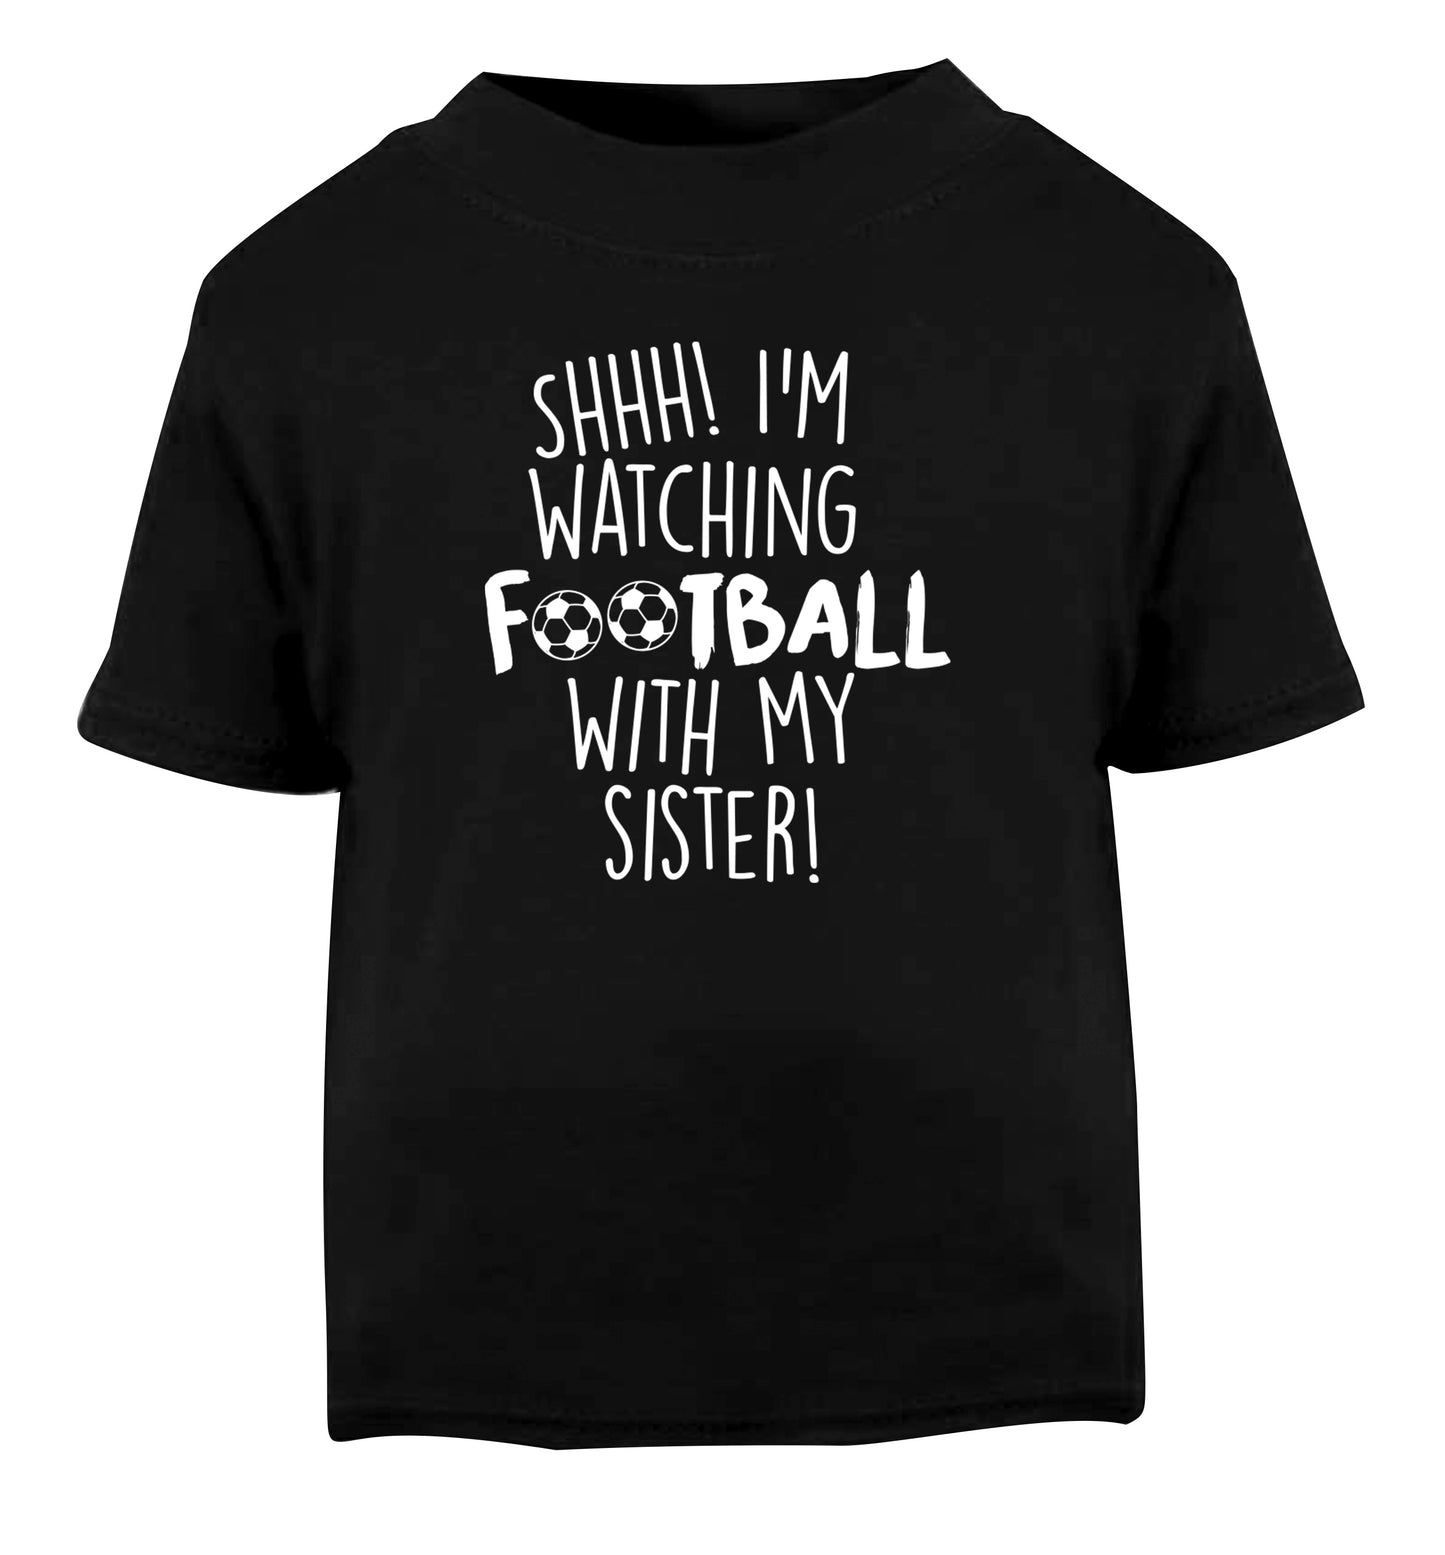 Shhh I'm watching football with my sister Black Baby Toddler Tshirt 2 years